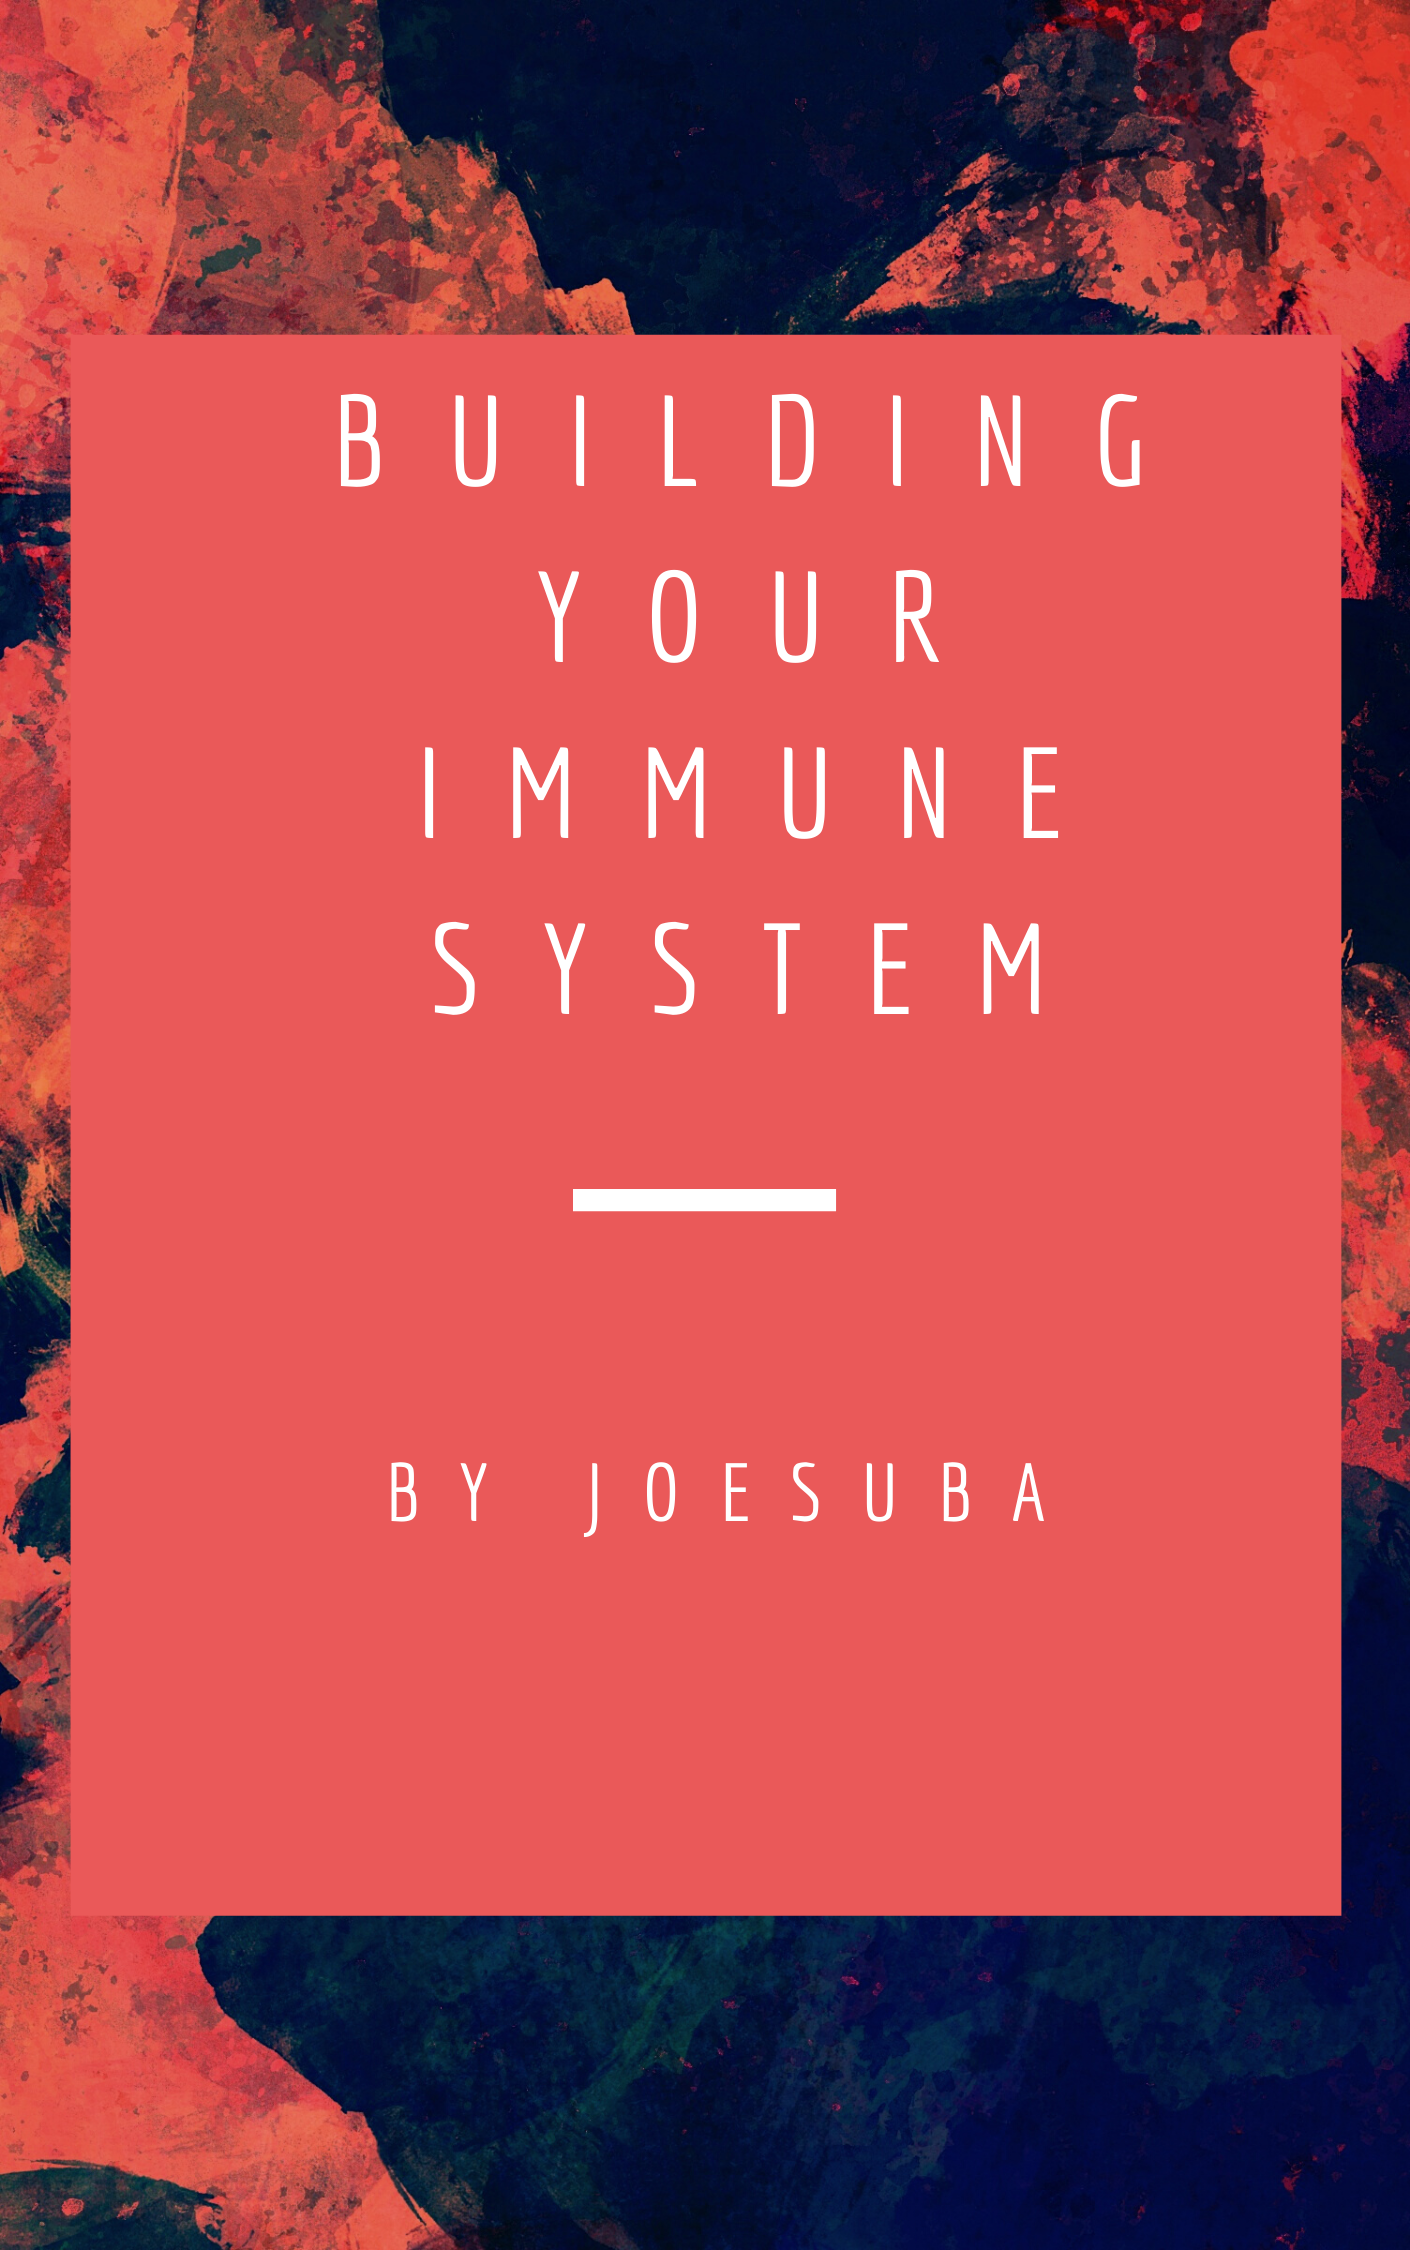 Building your immune system